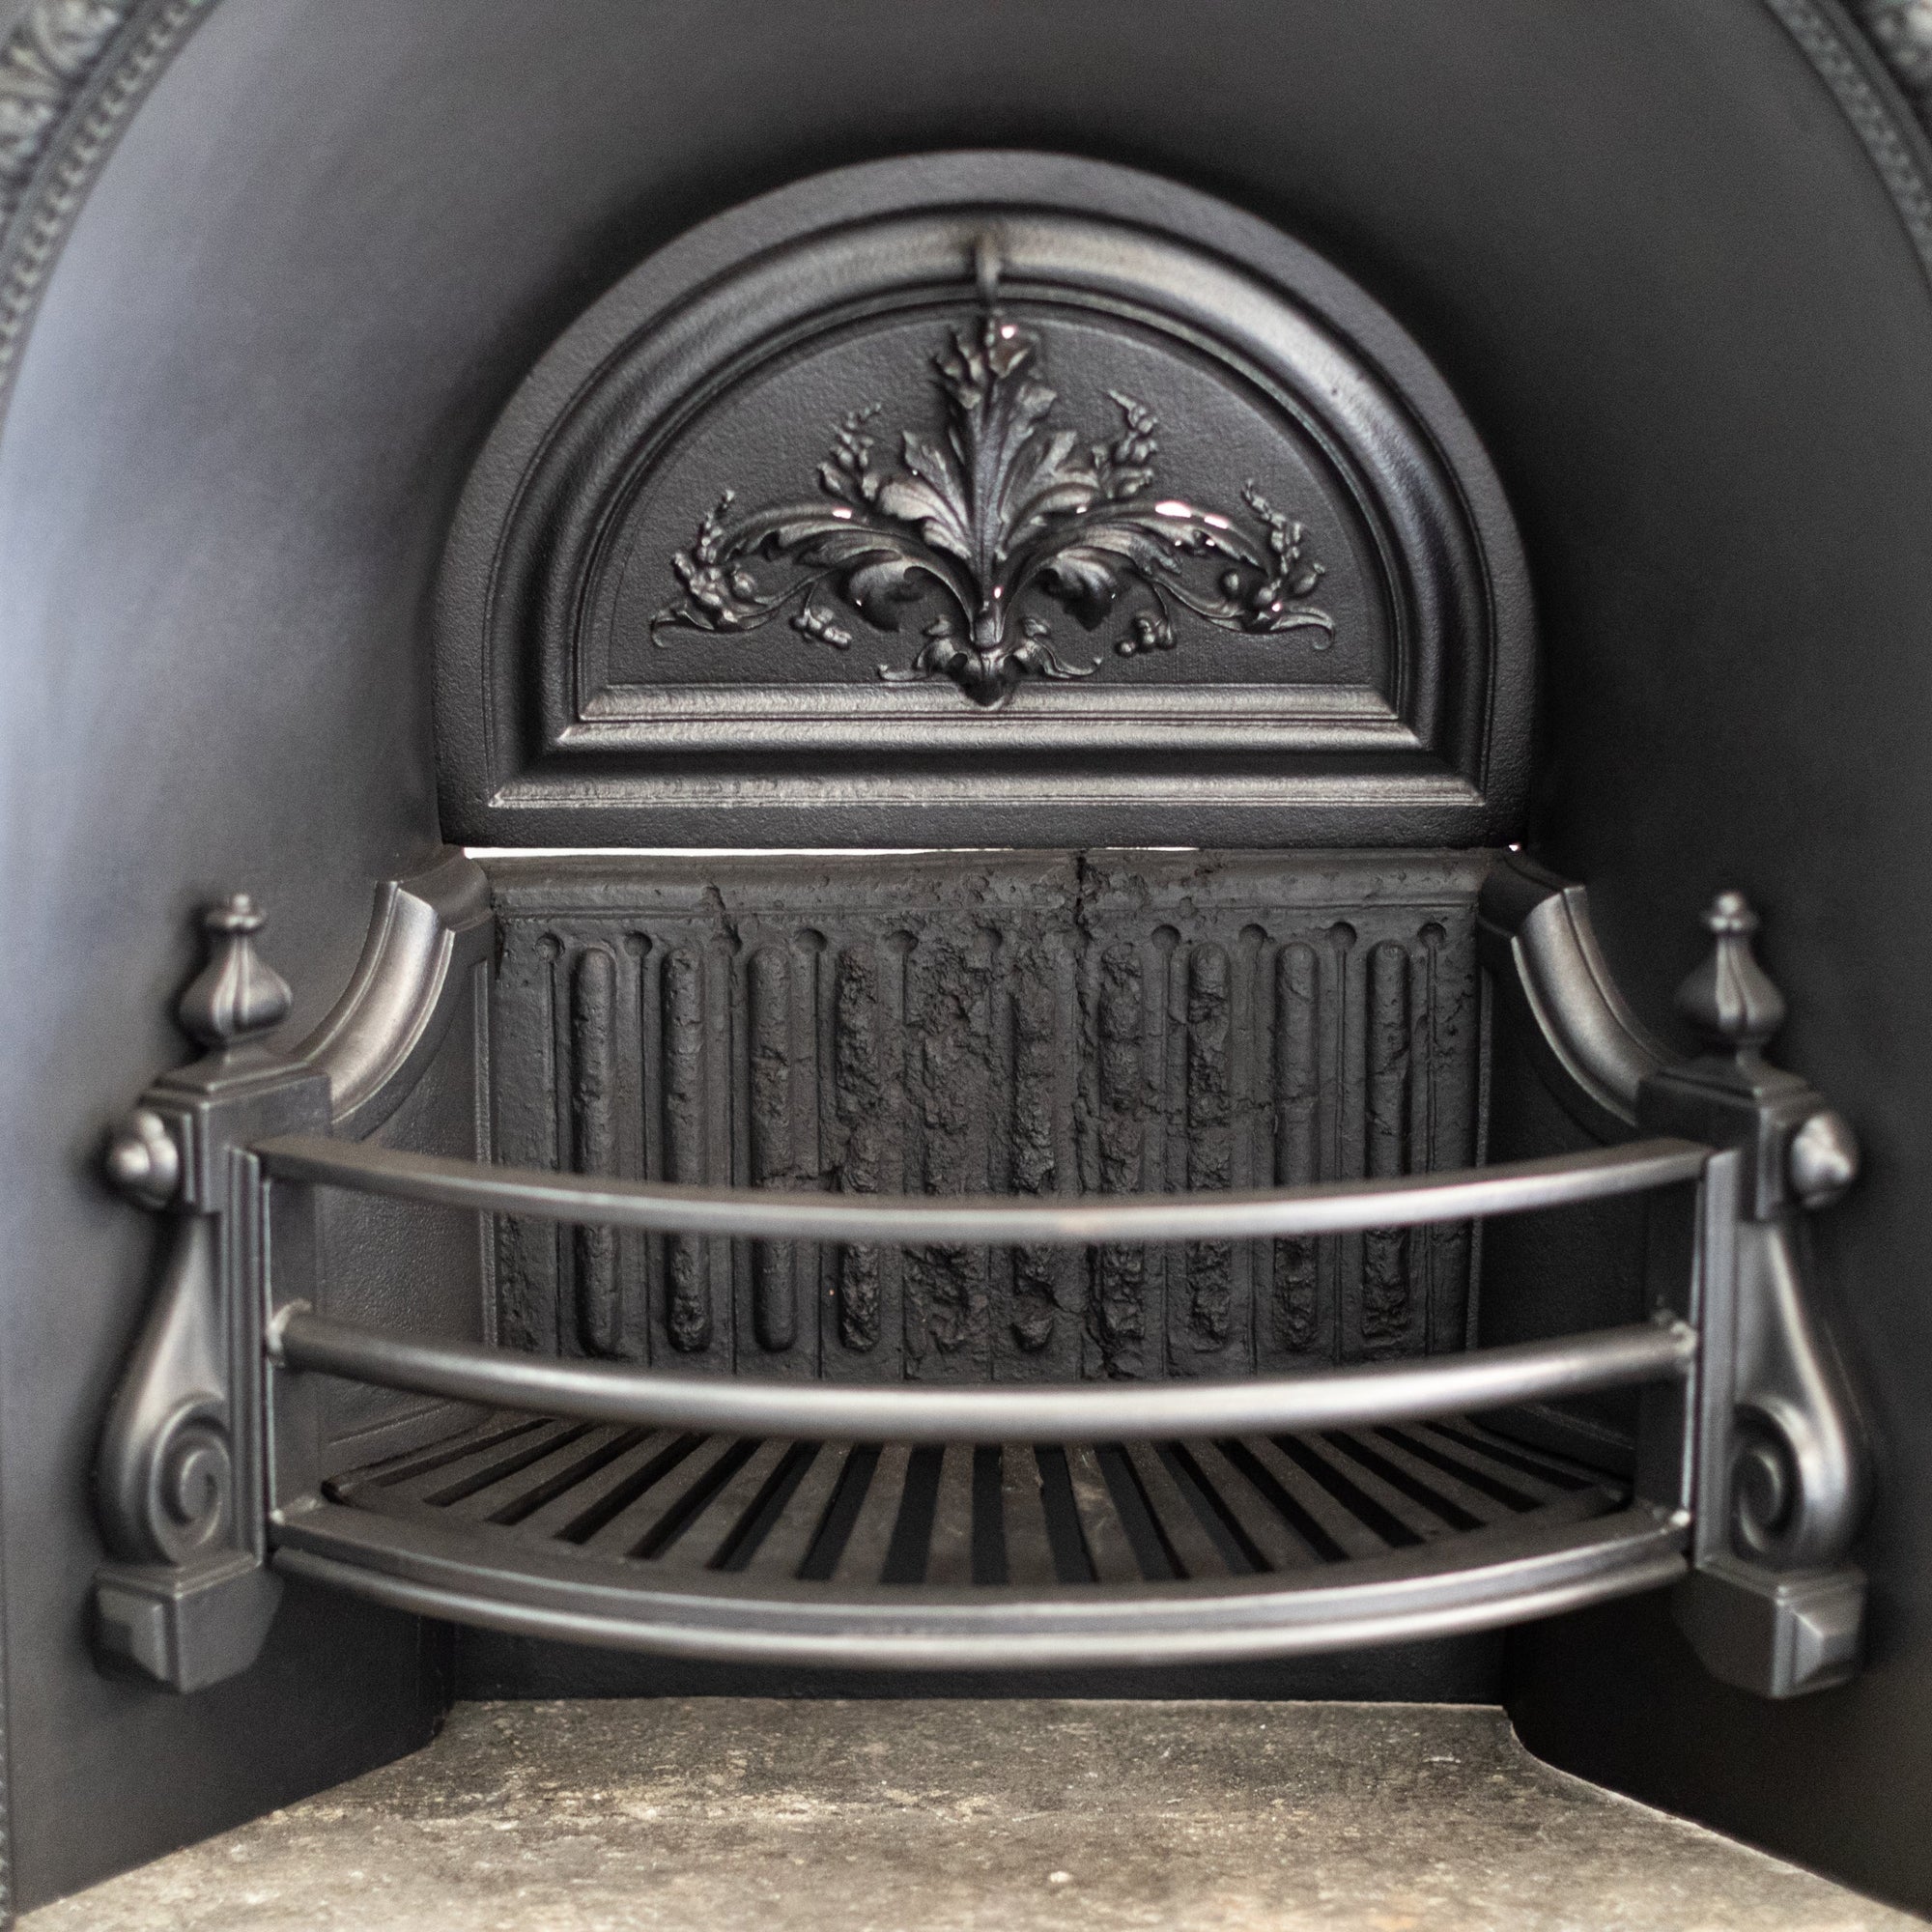 Antique Victorian Cast Iron Insert with Arched Opening | The Architectural Forum